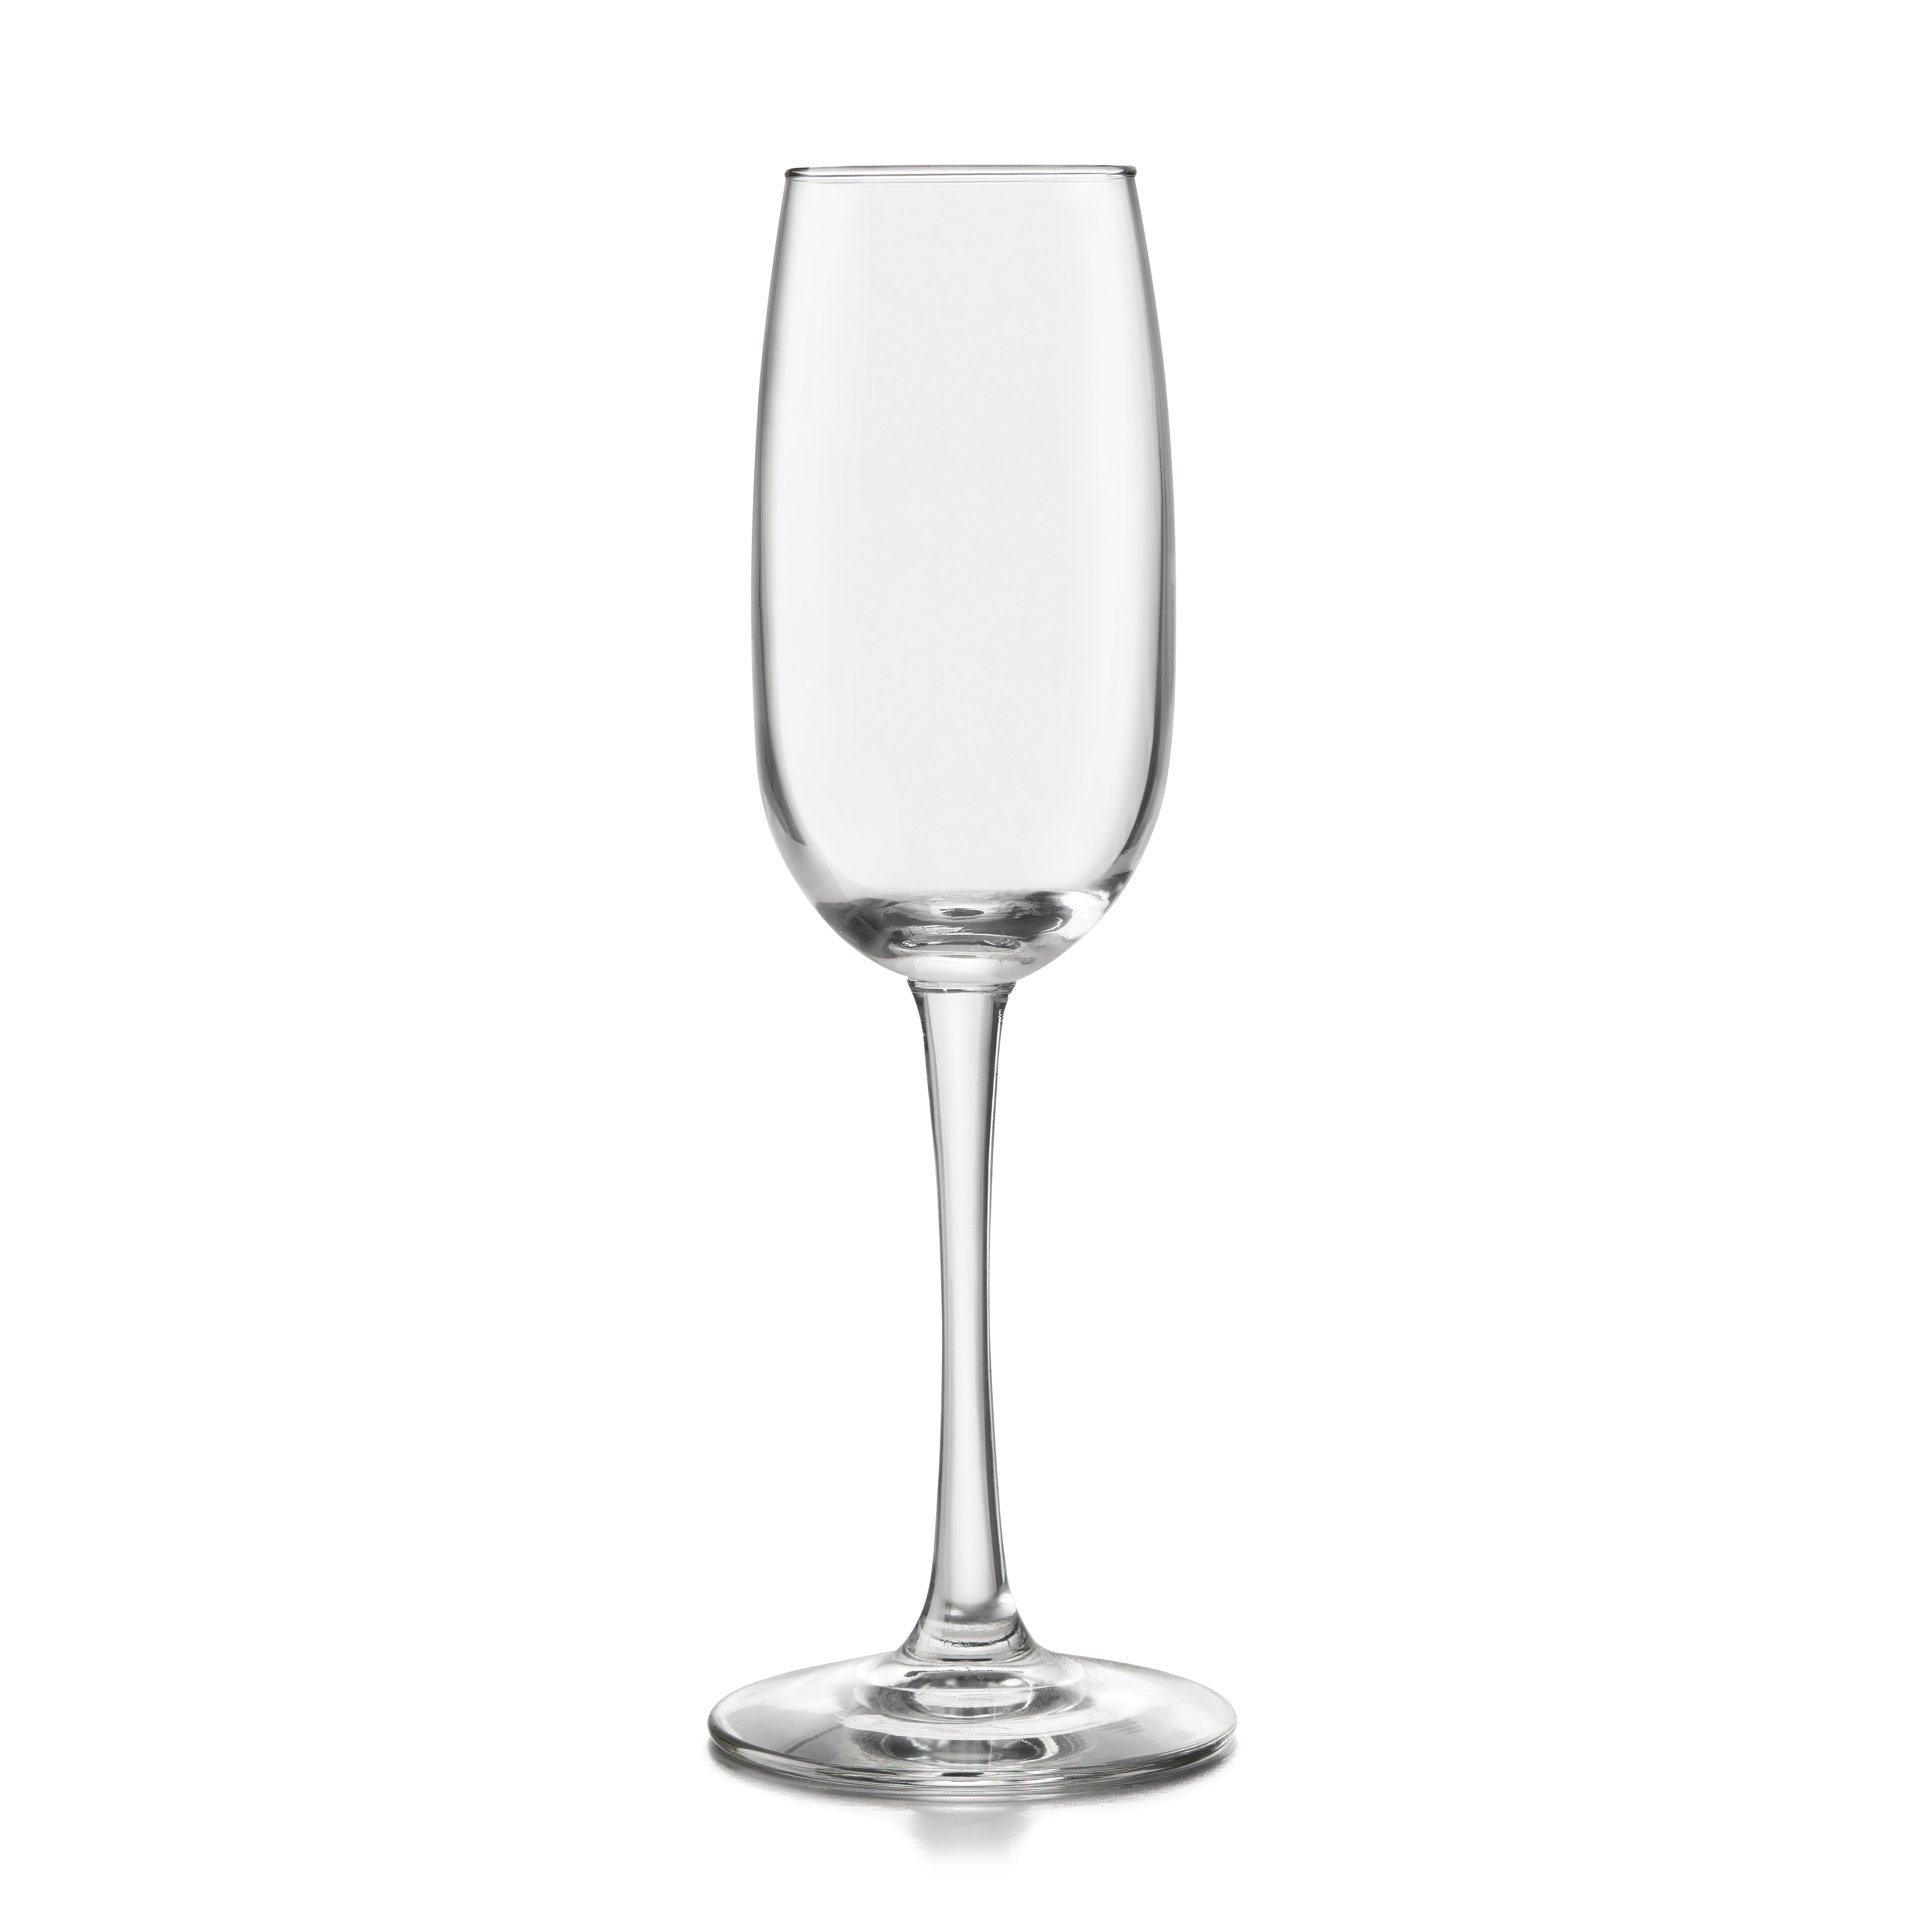 8 Oz. Libbey® Stemless Champagne Flute Glass - A228 - IdeaStage Promotional  Products